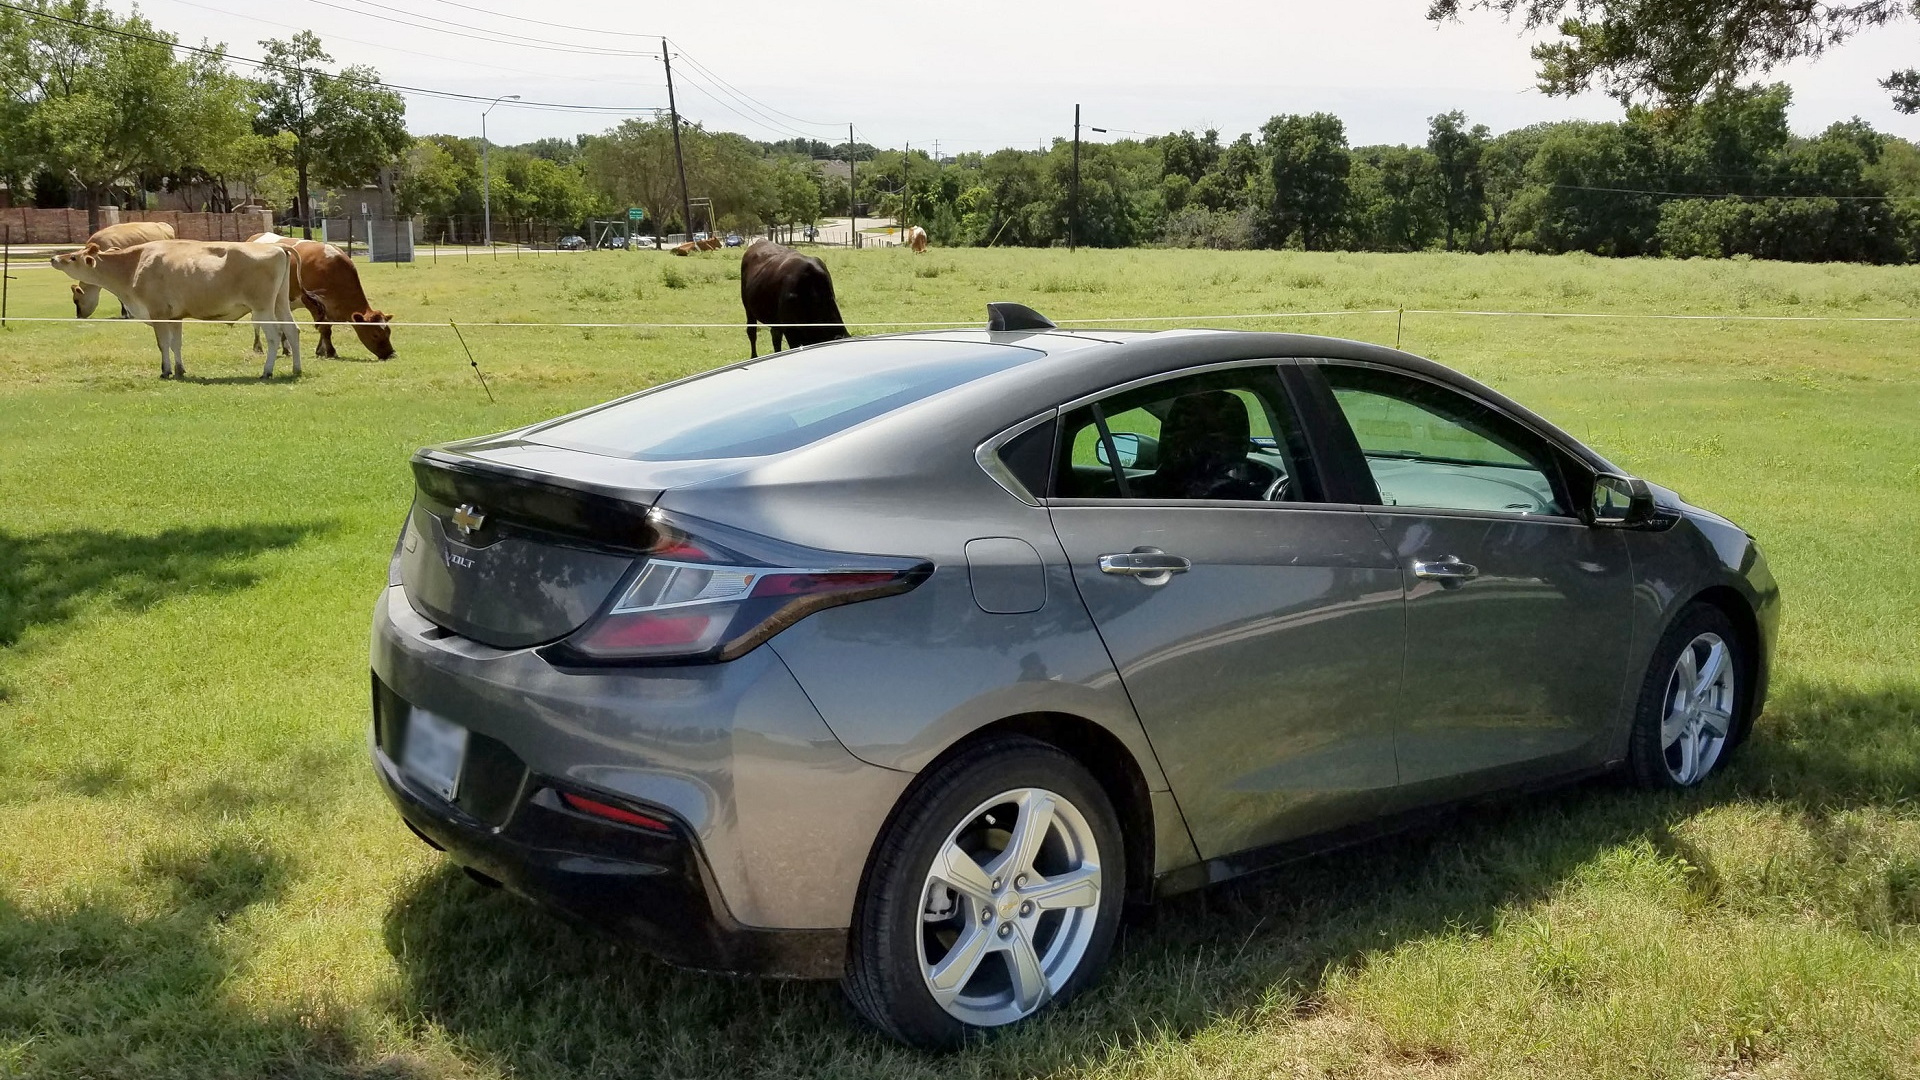 2017 Chevrolet Volt, leased by Phil Ganz of Texas